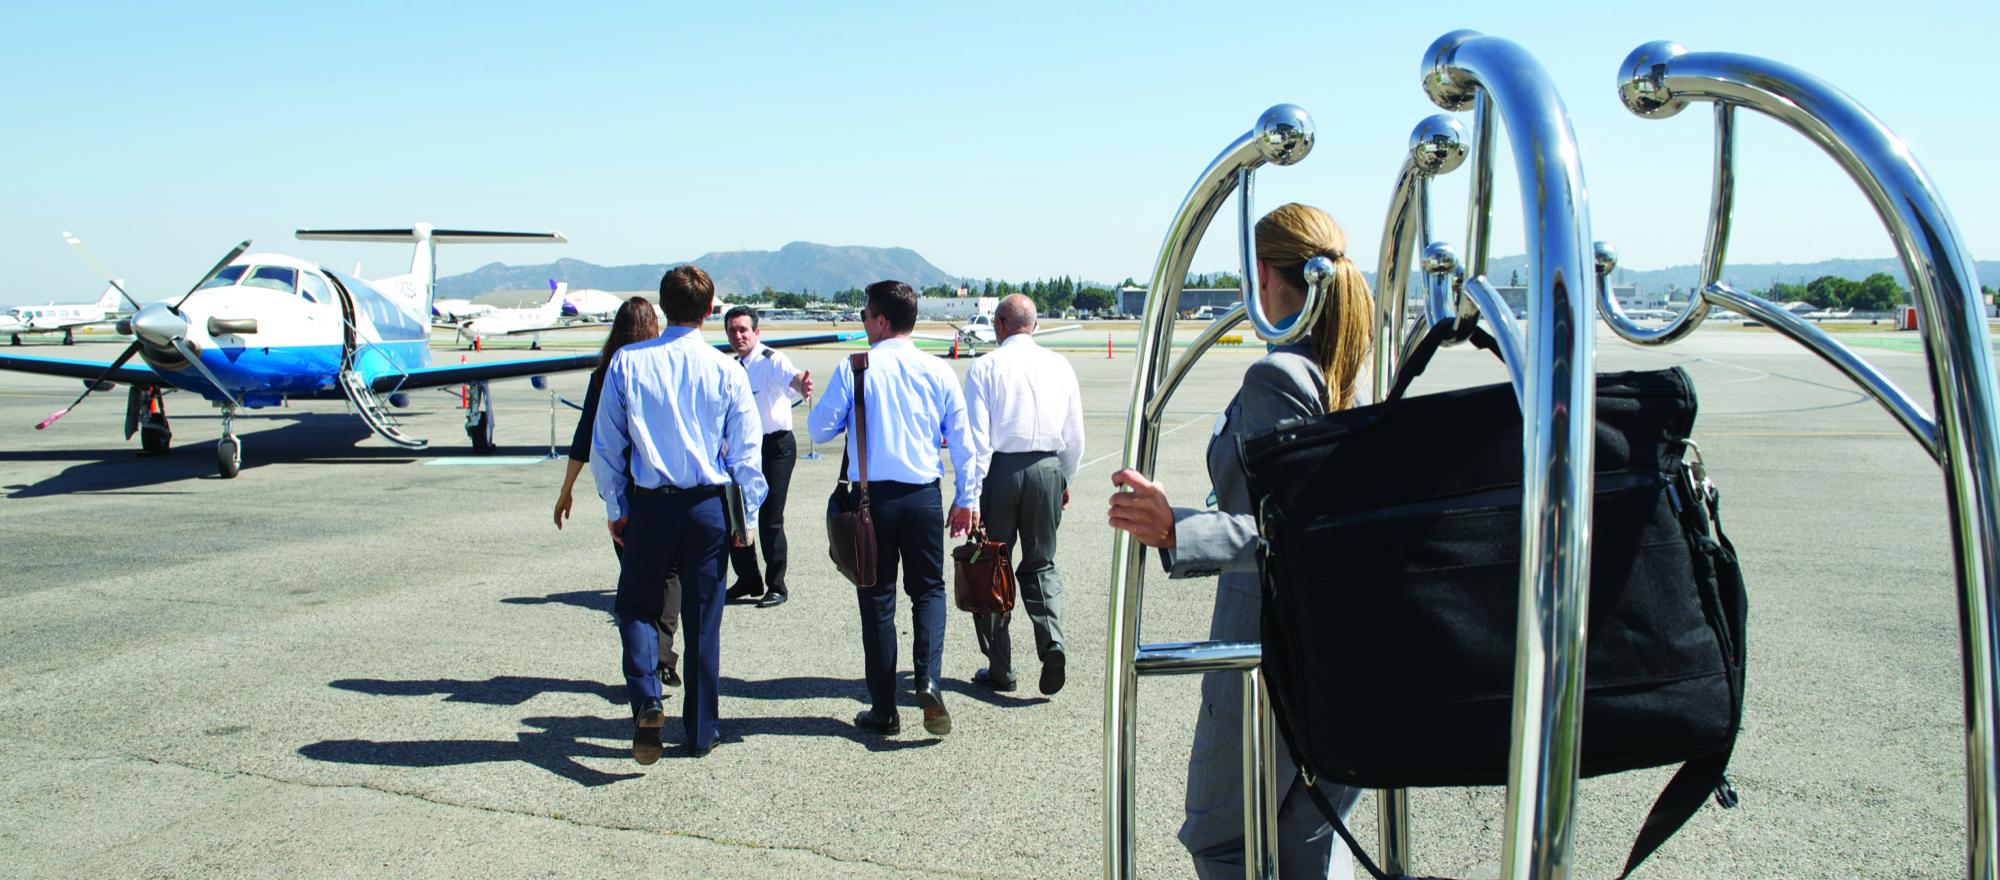 Surf Air offers unlimited San Francisco/Los Angeles flights. (Photo courtesy of Surf Air)